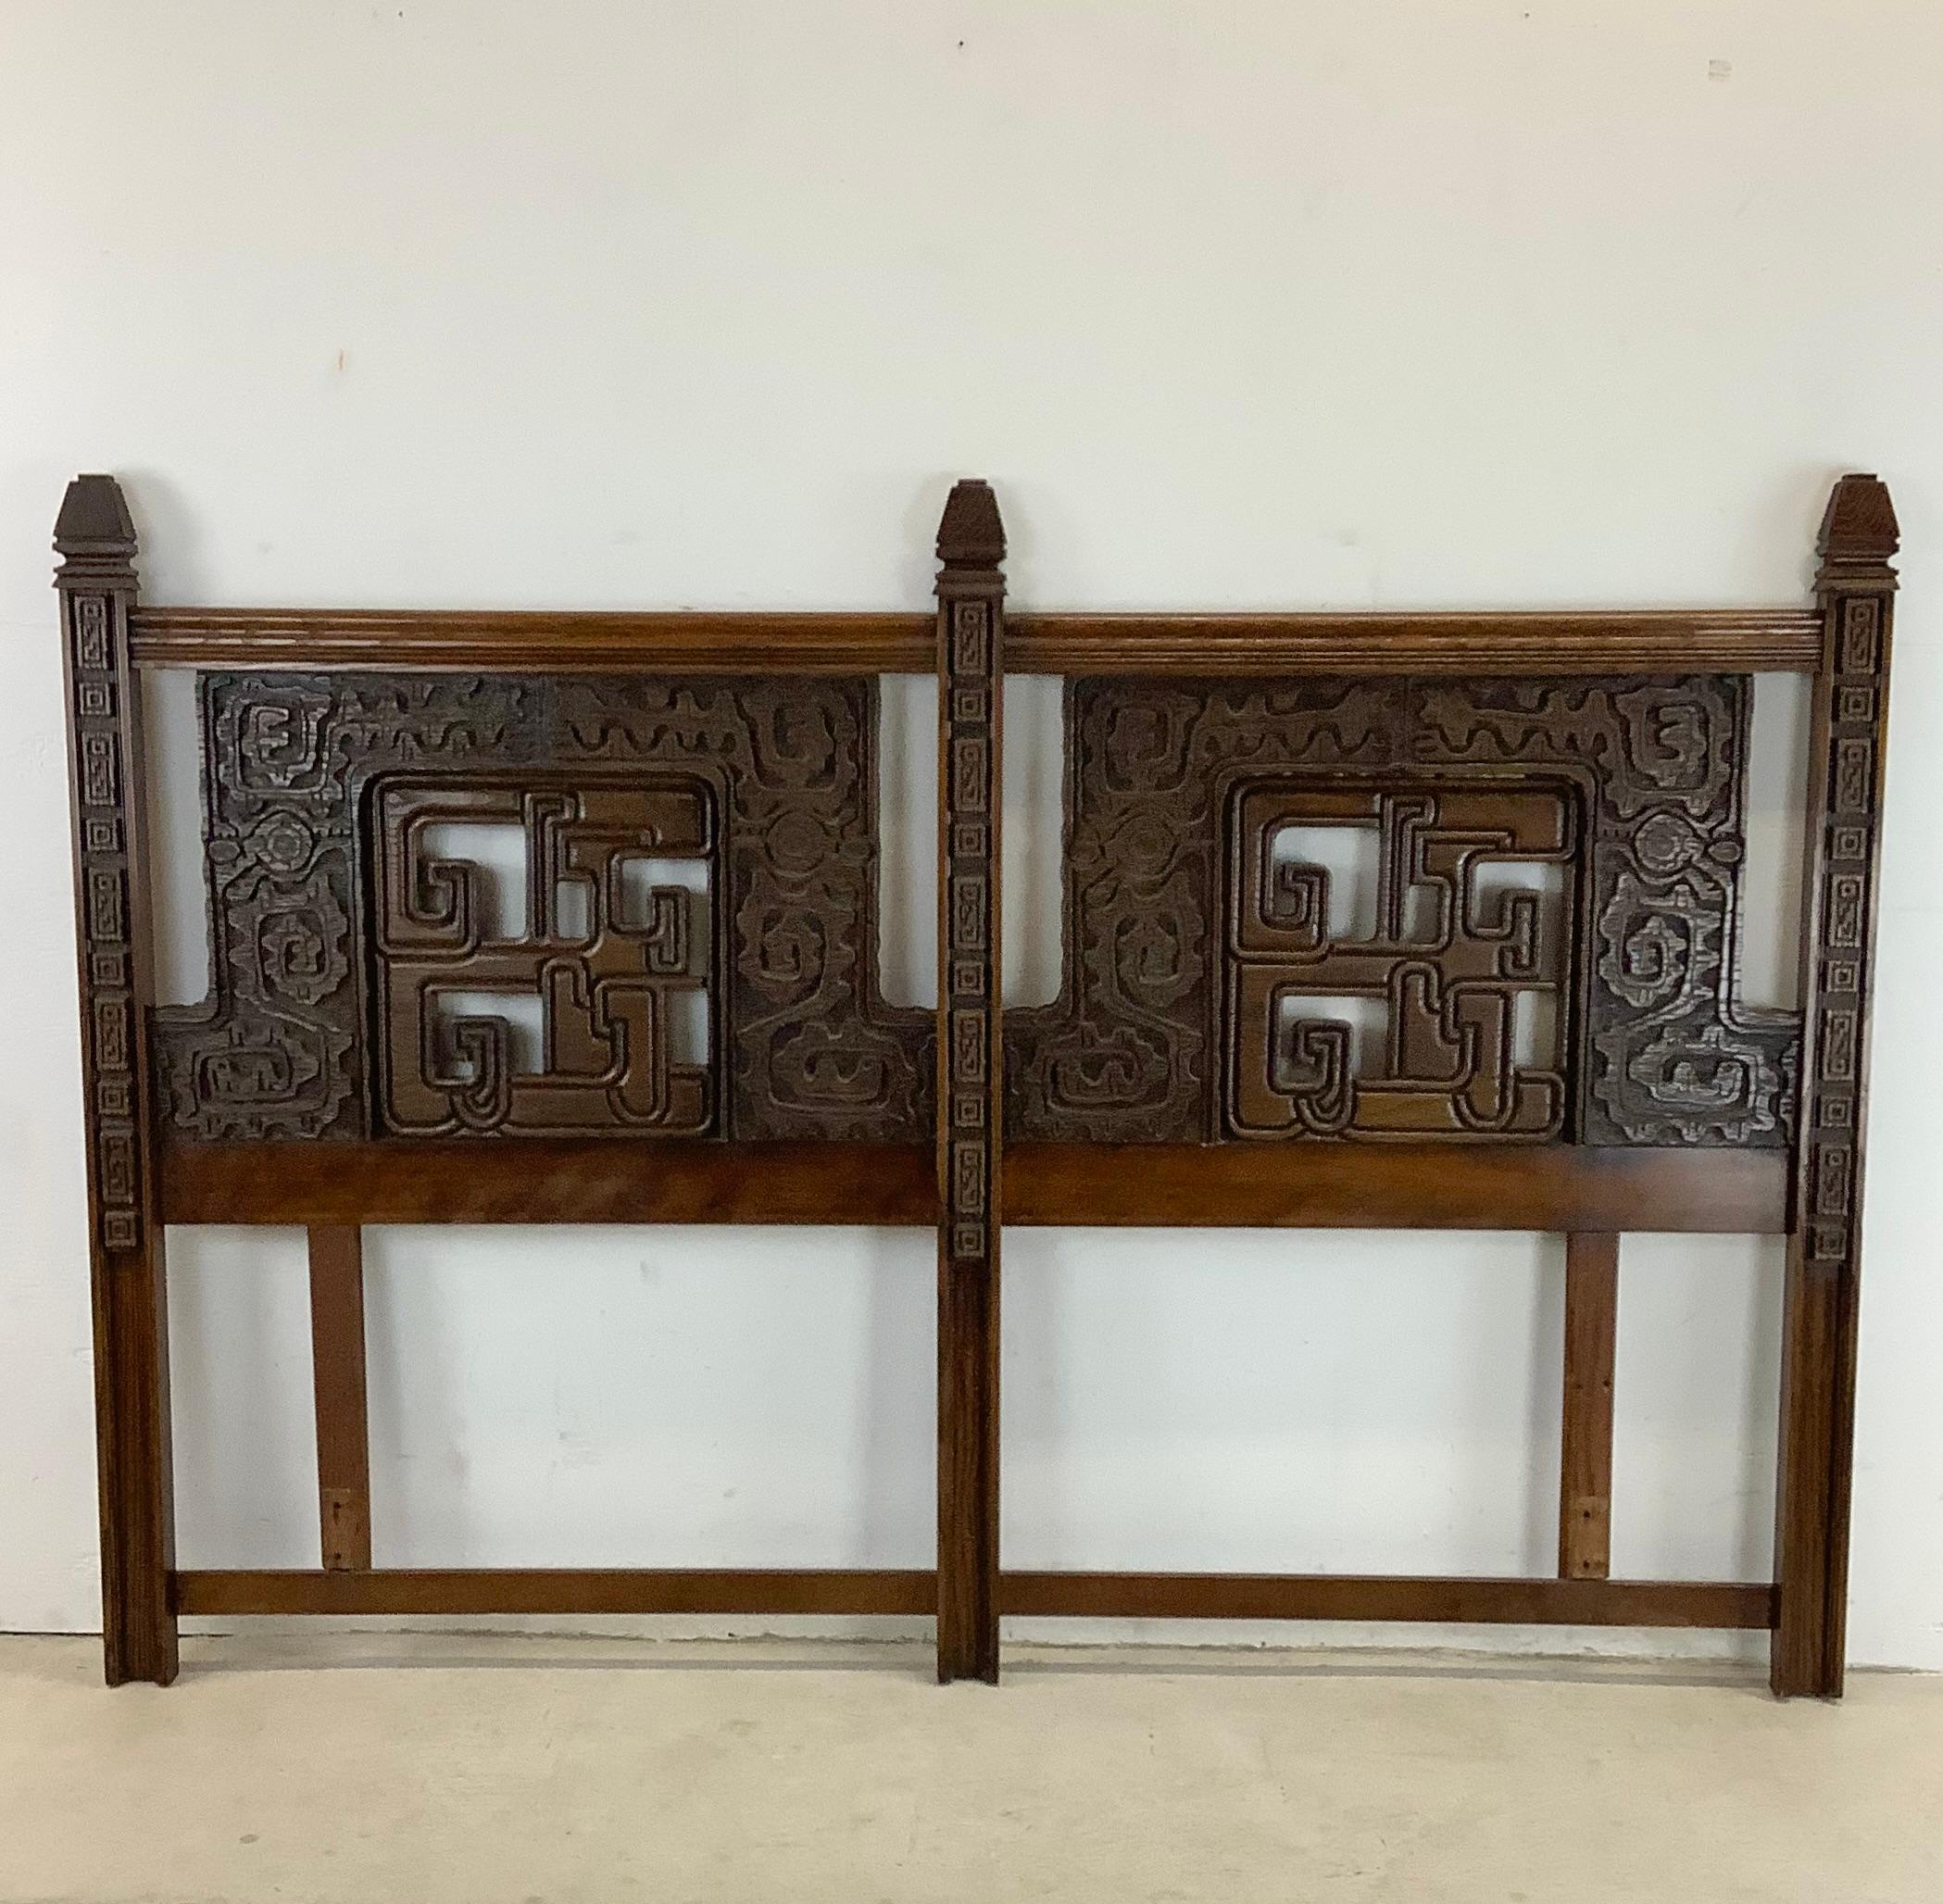 This Witco style brutalist headboard is designed to fit a standard 80 inch wide king size bed frame. The dark wood finish and heavy ornamental detail of this midcentury headboard make for a truly impressive bedroom centerpiece. The form and